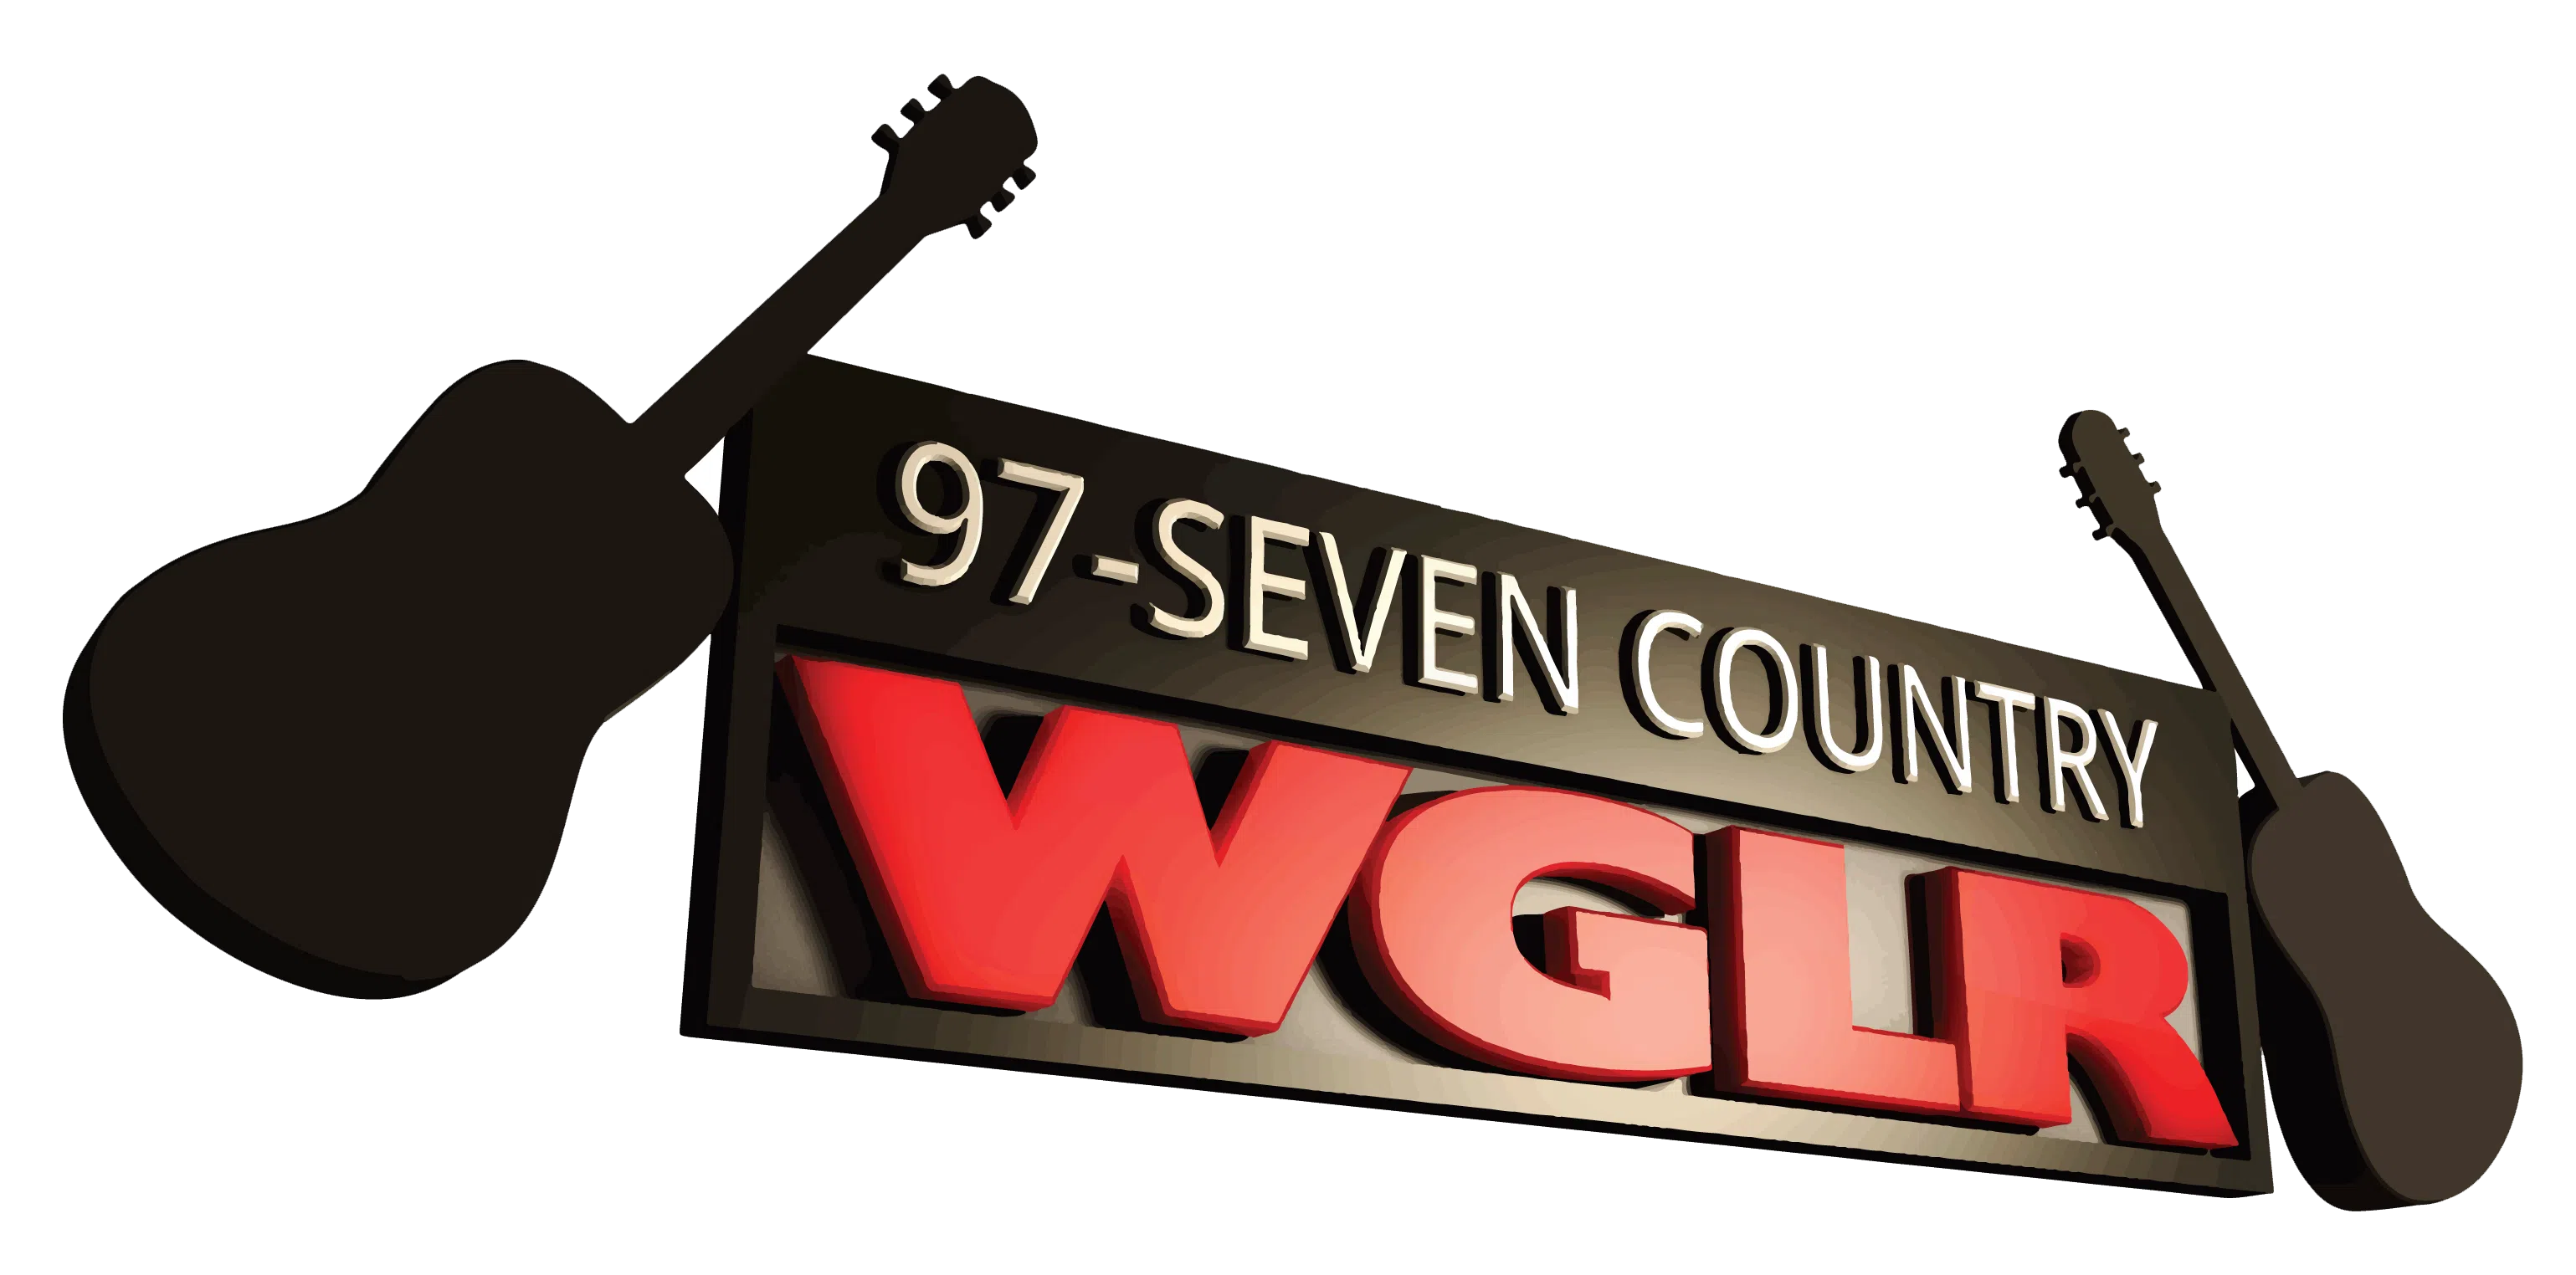 97 Seven Country WGLR - The Tri-States Best Variety of Country - Lancaster, Dubuque, Galena, Platteville